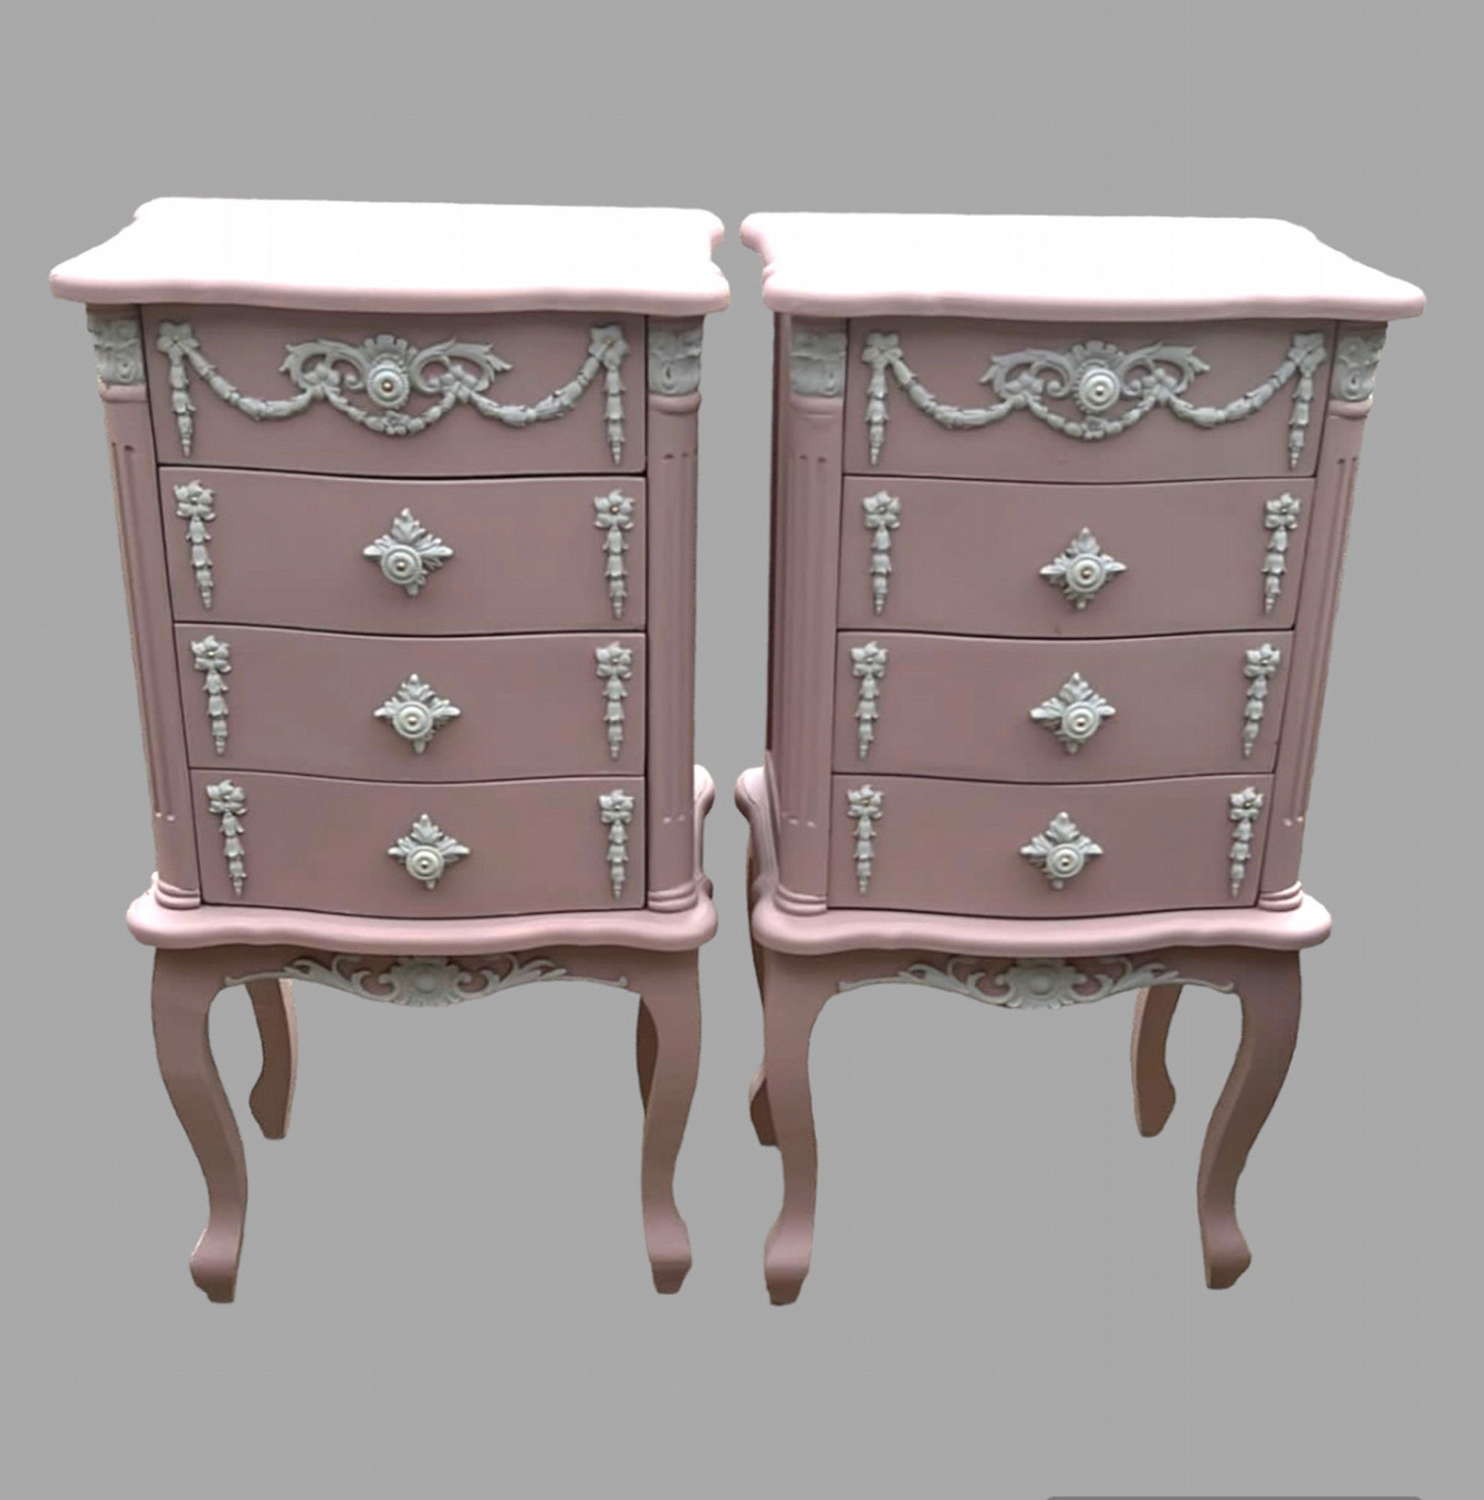 An Ornate Pair of Continental Painted Bedsides